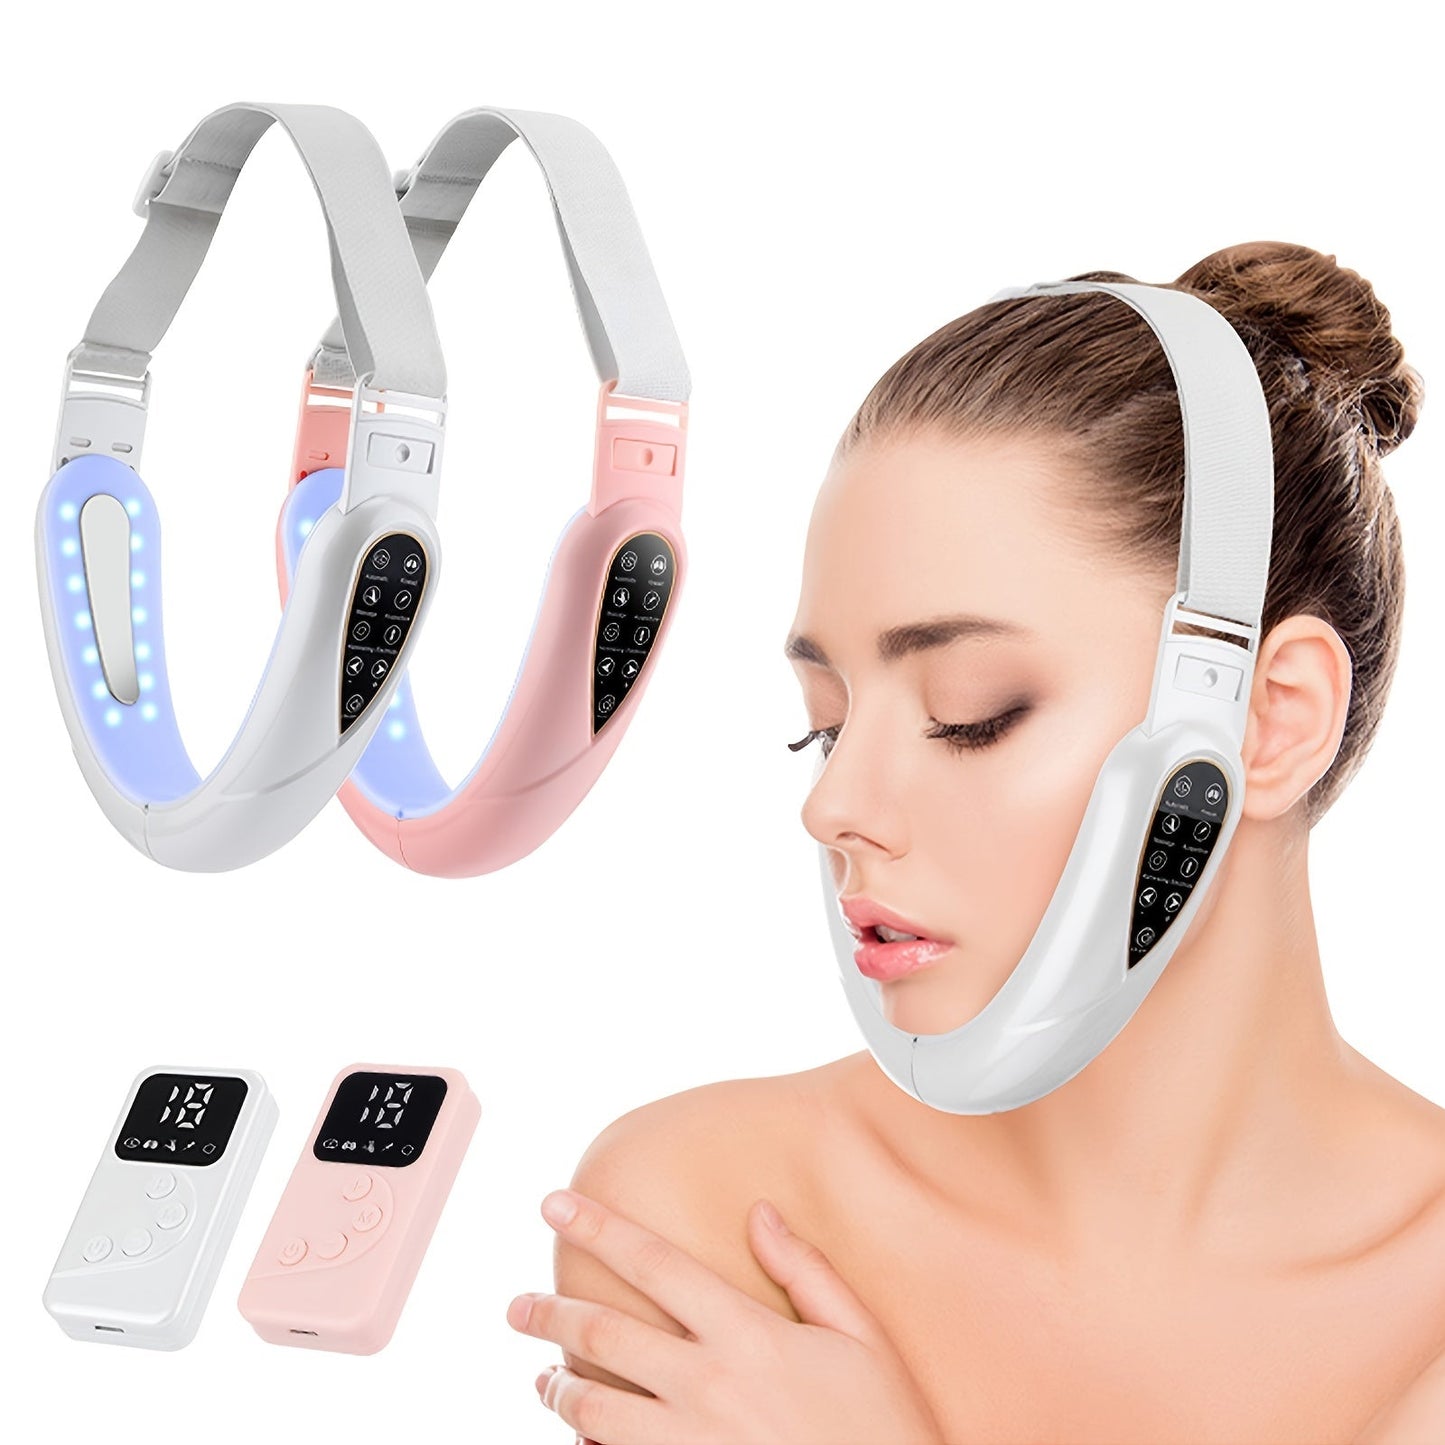 Lomotec  New Year gifts and Valentine's Day gifts Foldable Double Chin Massager, Face Massager With Remote Control, Chin/Facial Massager With 5 Modes